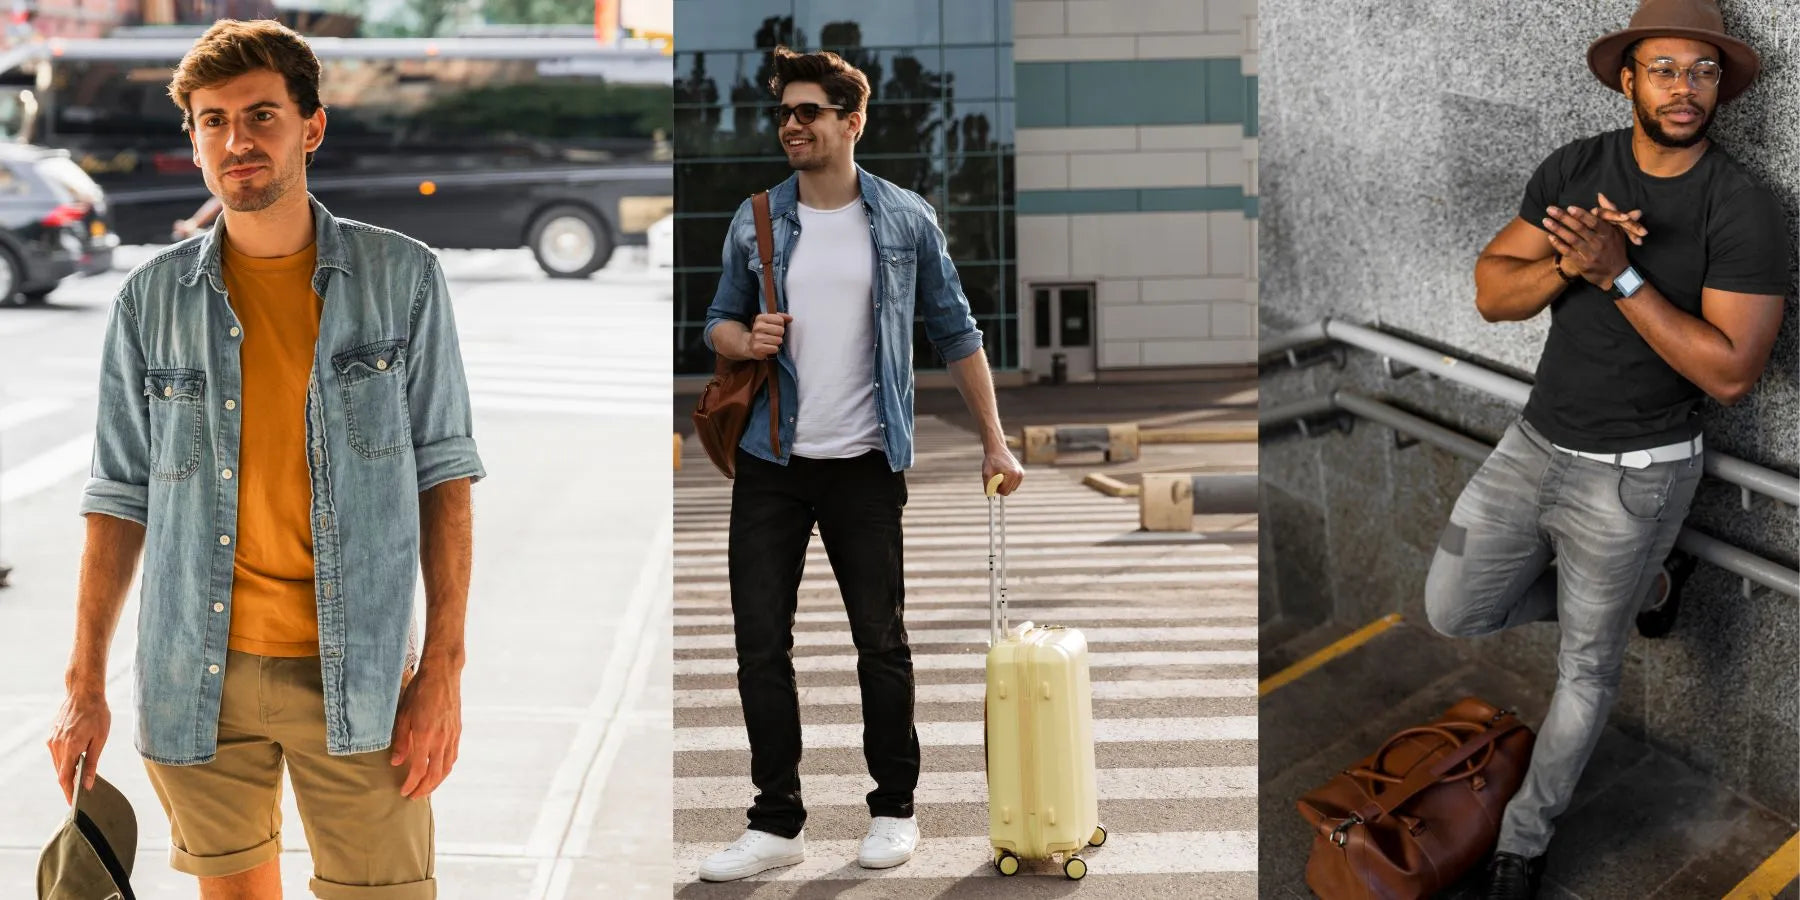 What to wear to the airport : Trendy and Comfortable Outfit Ideas for Men